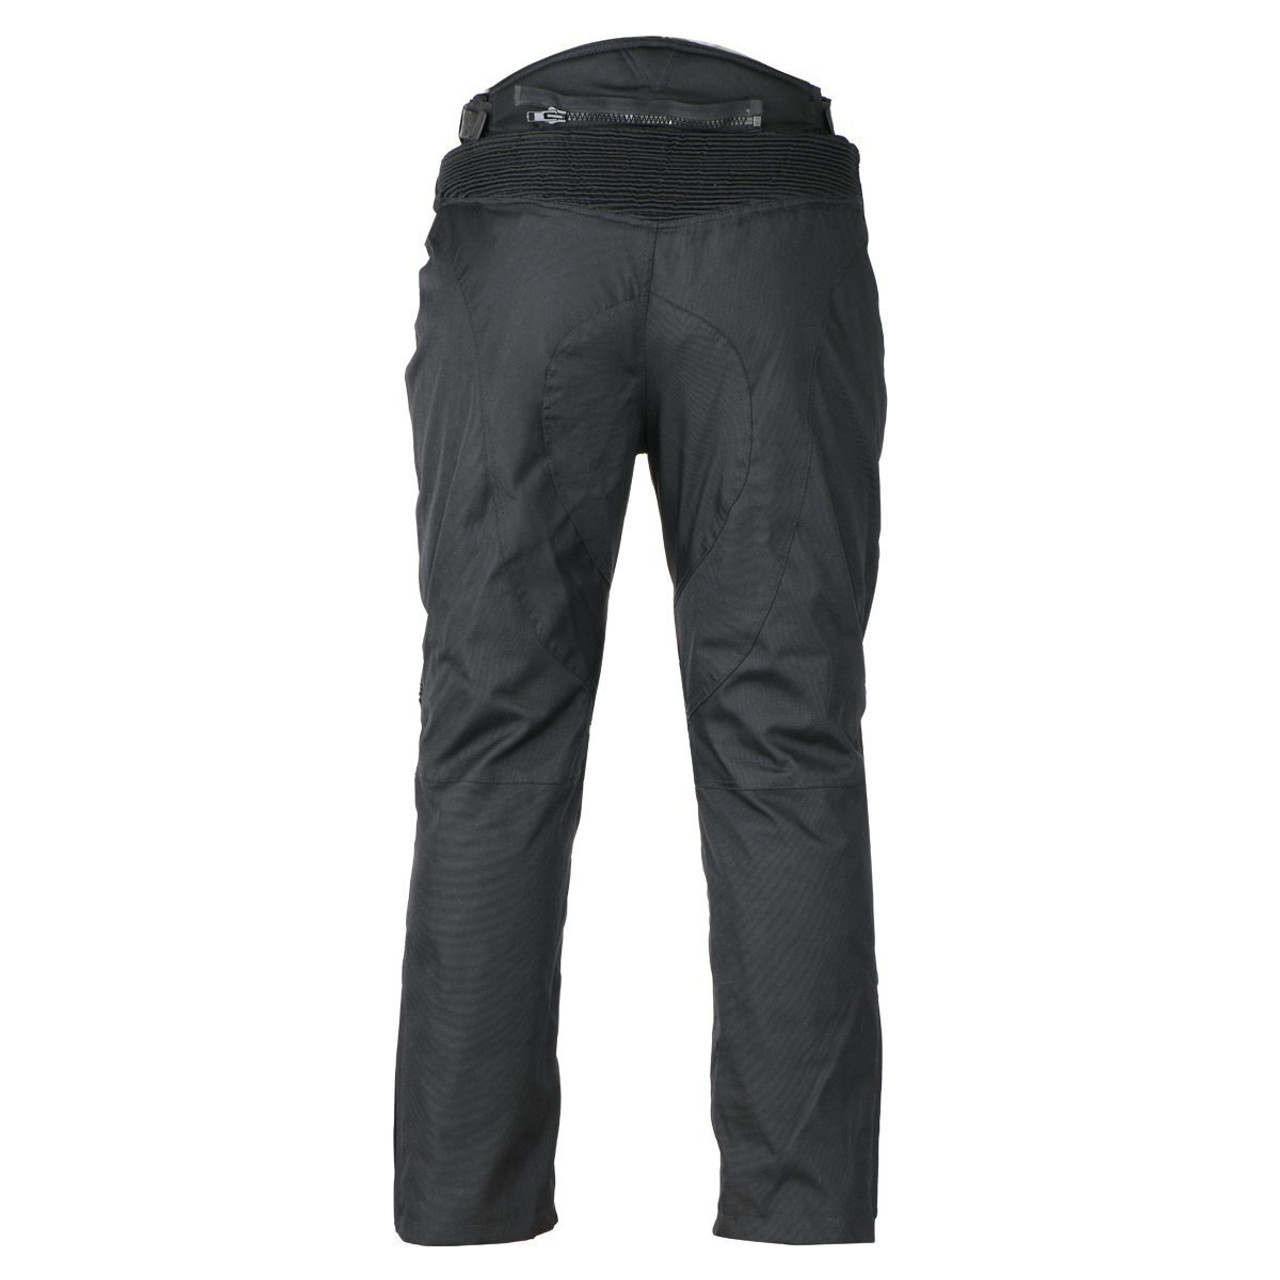 Mens Advanced All Weather CE Armor Waterproof Motorcycle Pants